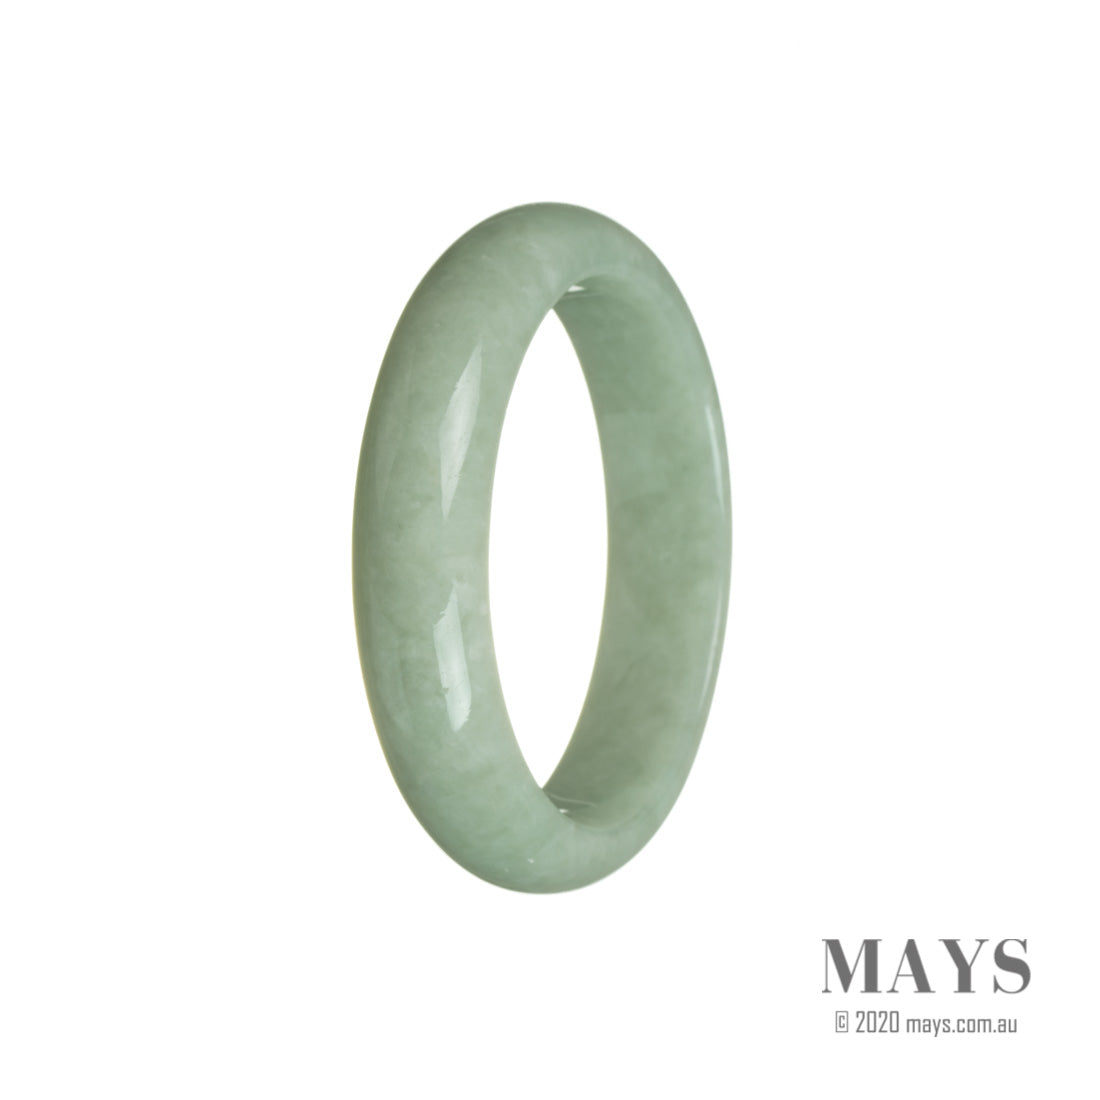 A stunning half moon-shaped jade bracelet made of real, natural green Burma jade. The bracelet measures 55mm in diameter and is a beautiful addition to any jewelry collection.